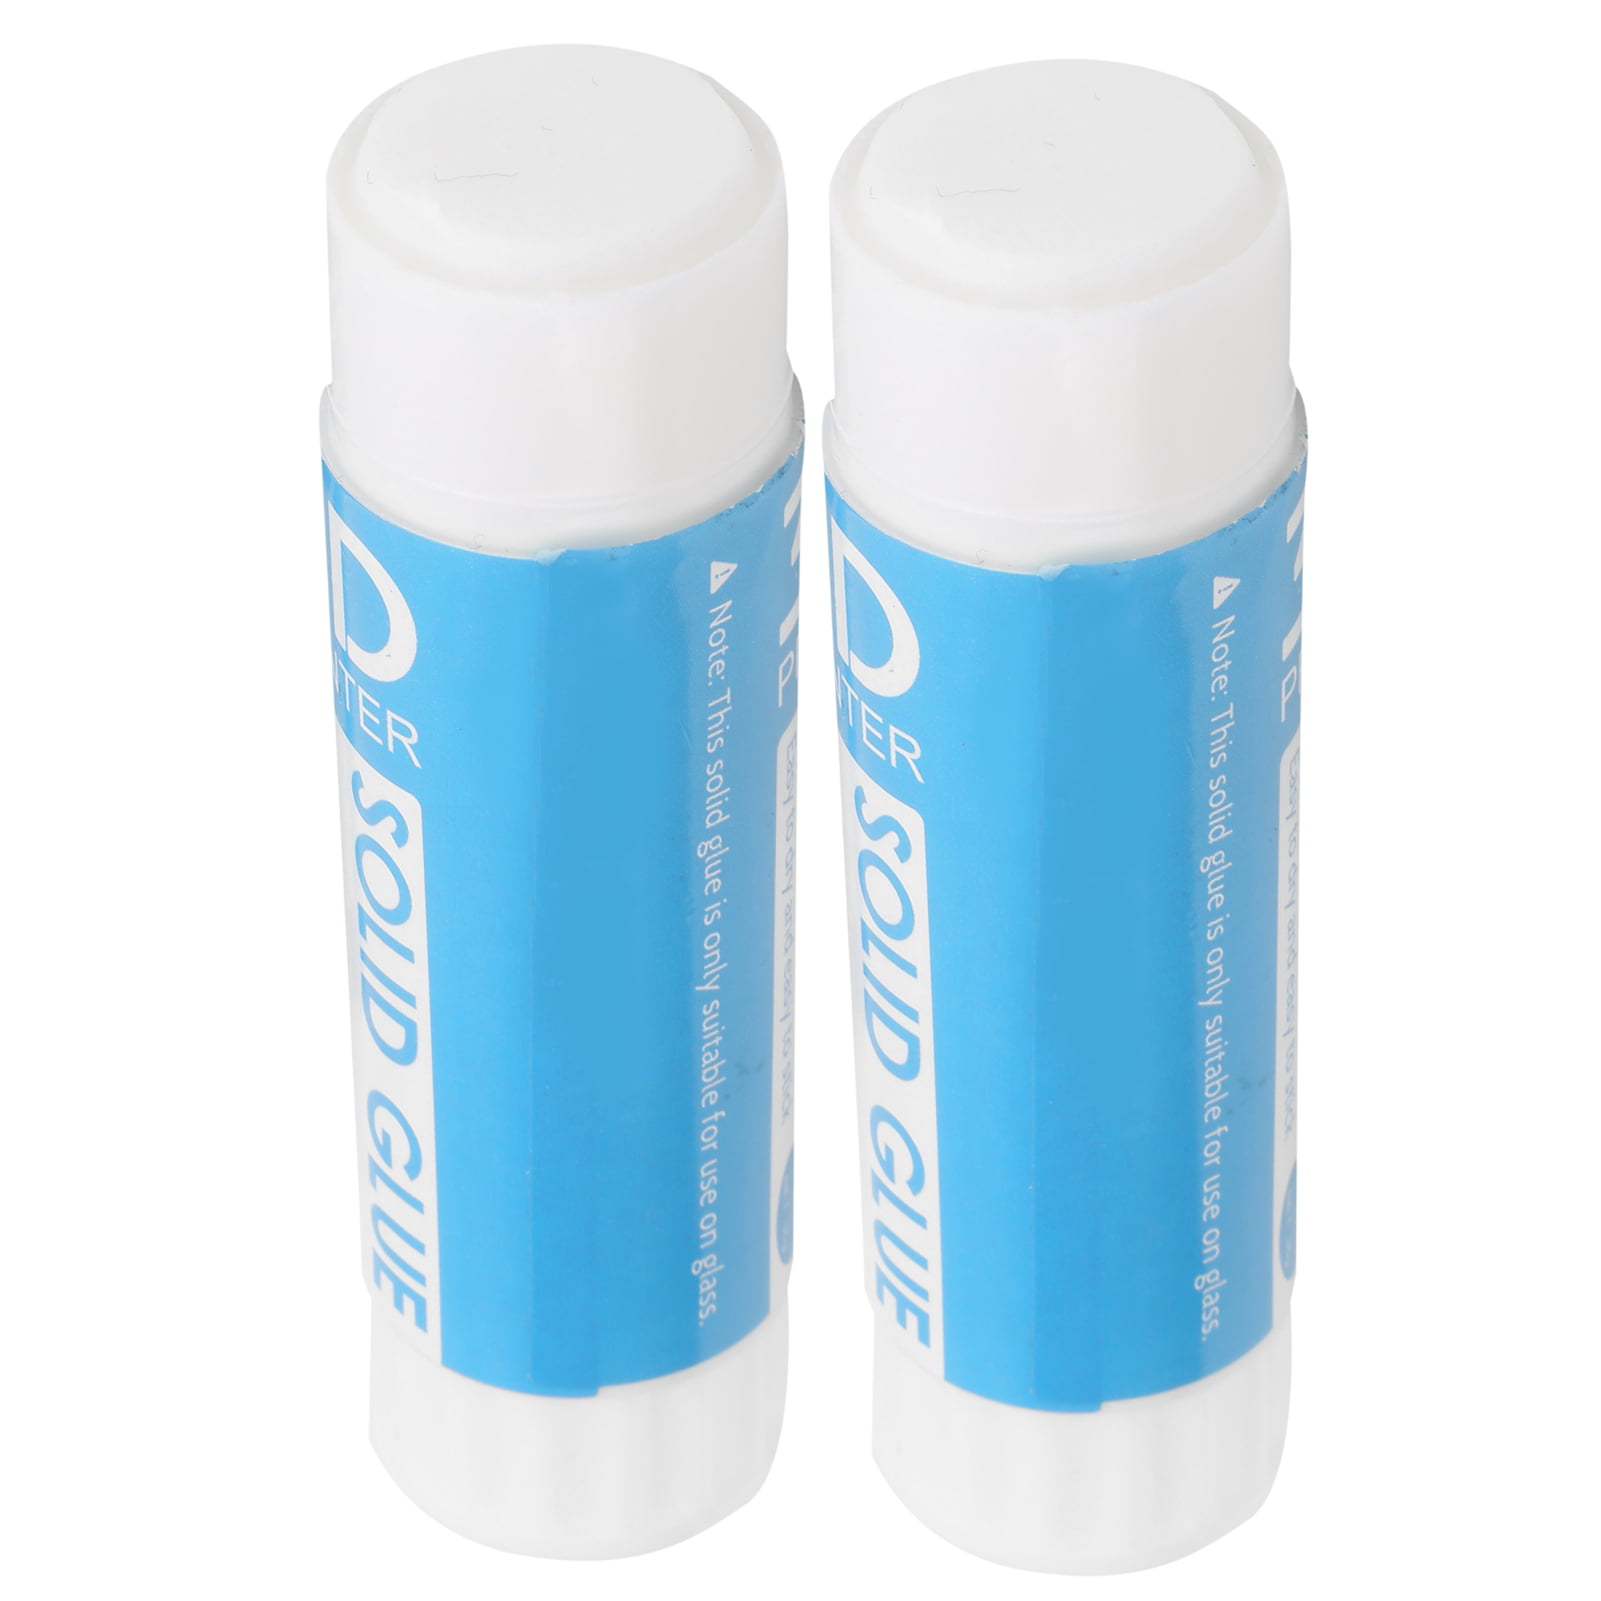 3D Printer PVA Glue, 98mm Water-Soluble Eco-friendly Washable Paste Glue Stick Non- With Out Model Making - Walmart.com